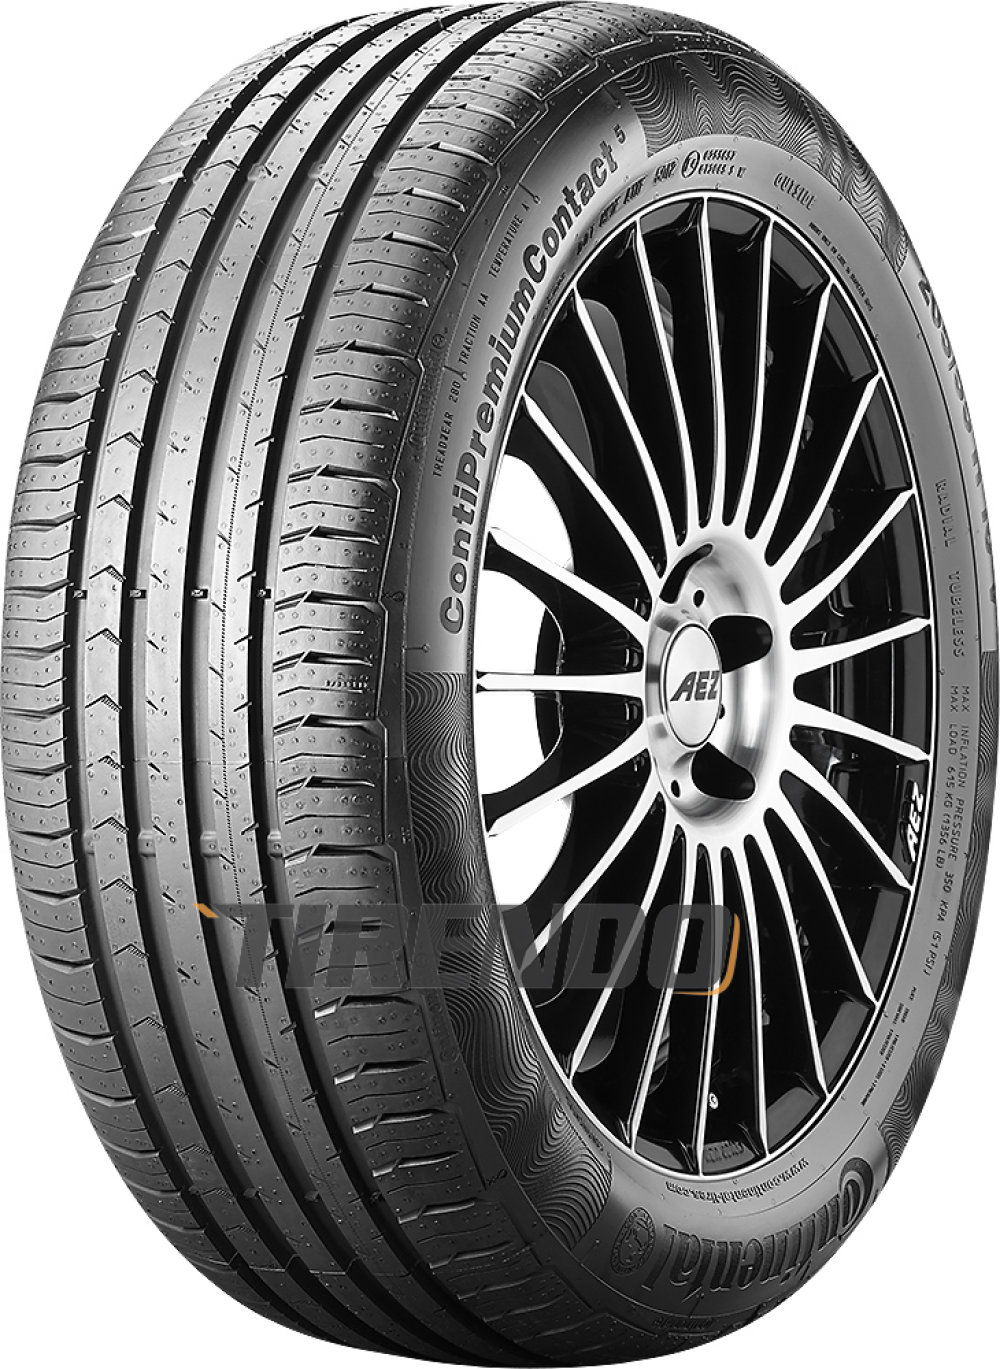 Image of Continental ContiPremiumContact 5 ( 185/70 R14 88H )